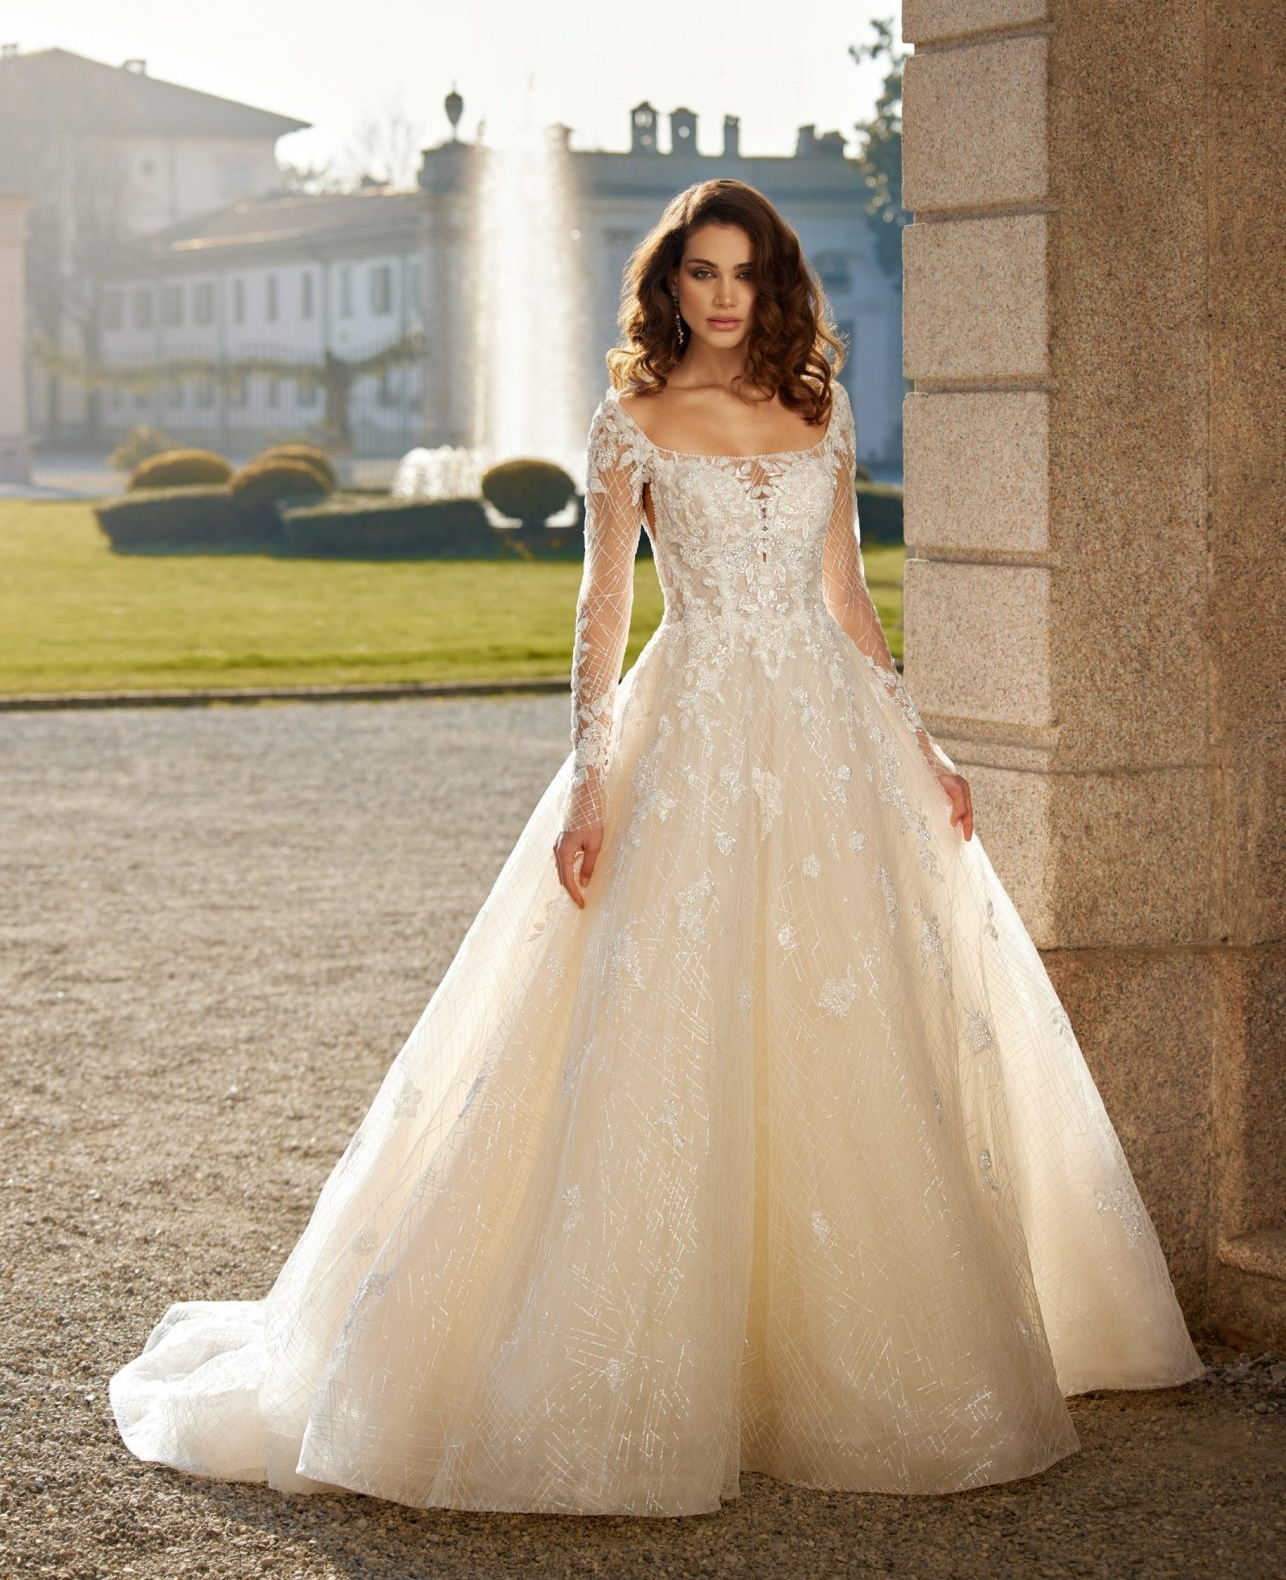 Where to buy or rent wedding gowns in Hong Kong | Localiiz